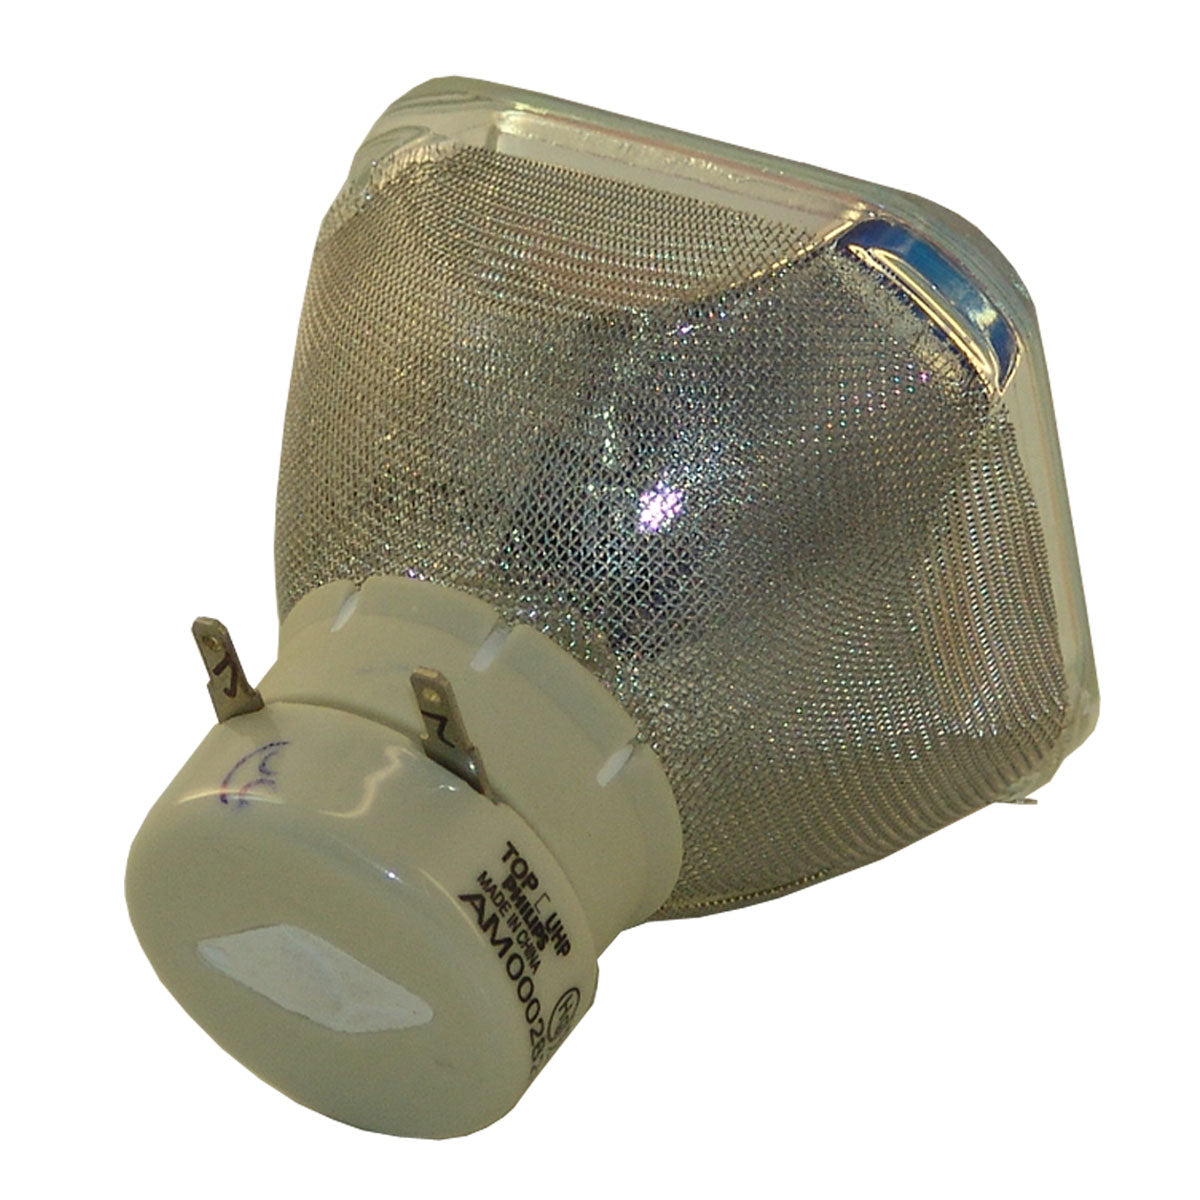 Specialty Equipment Lamps TEQ-LAMP1 Philips Projector Bare Lamp